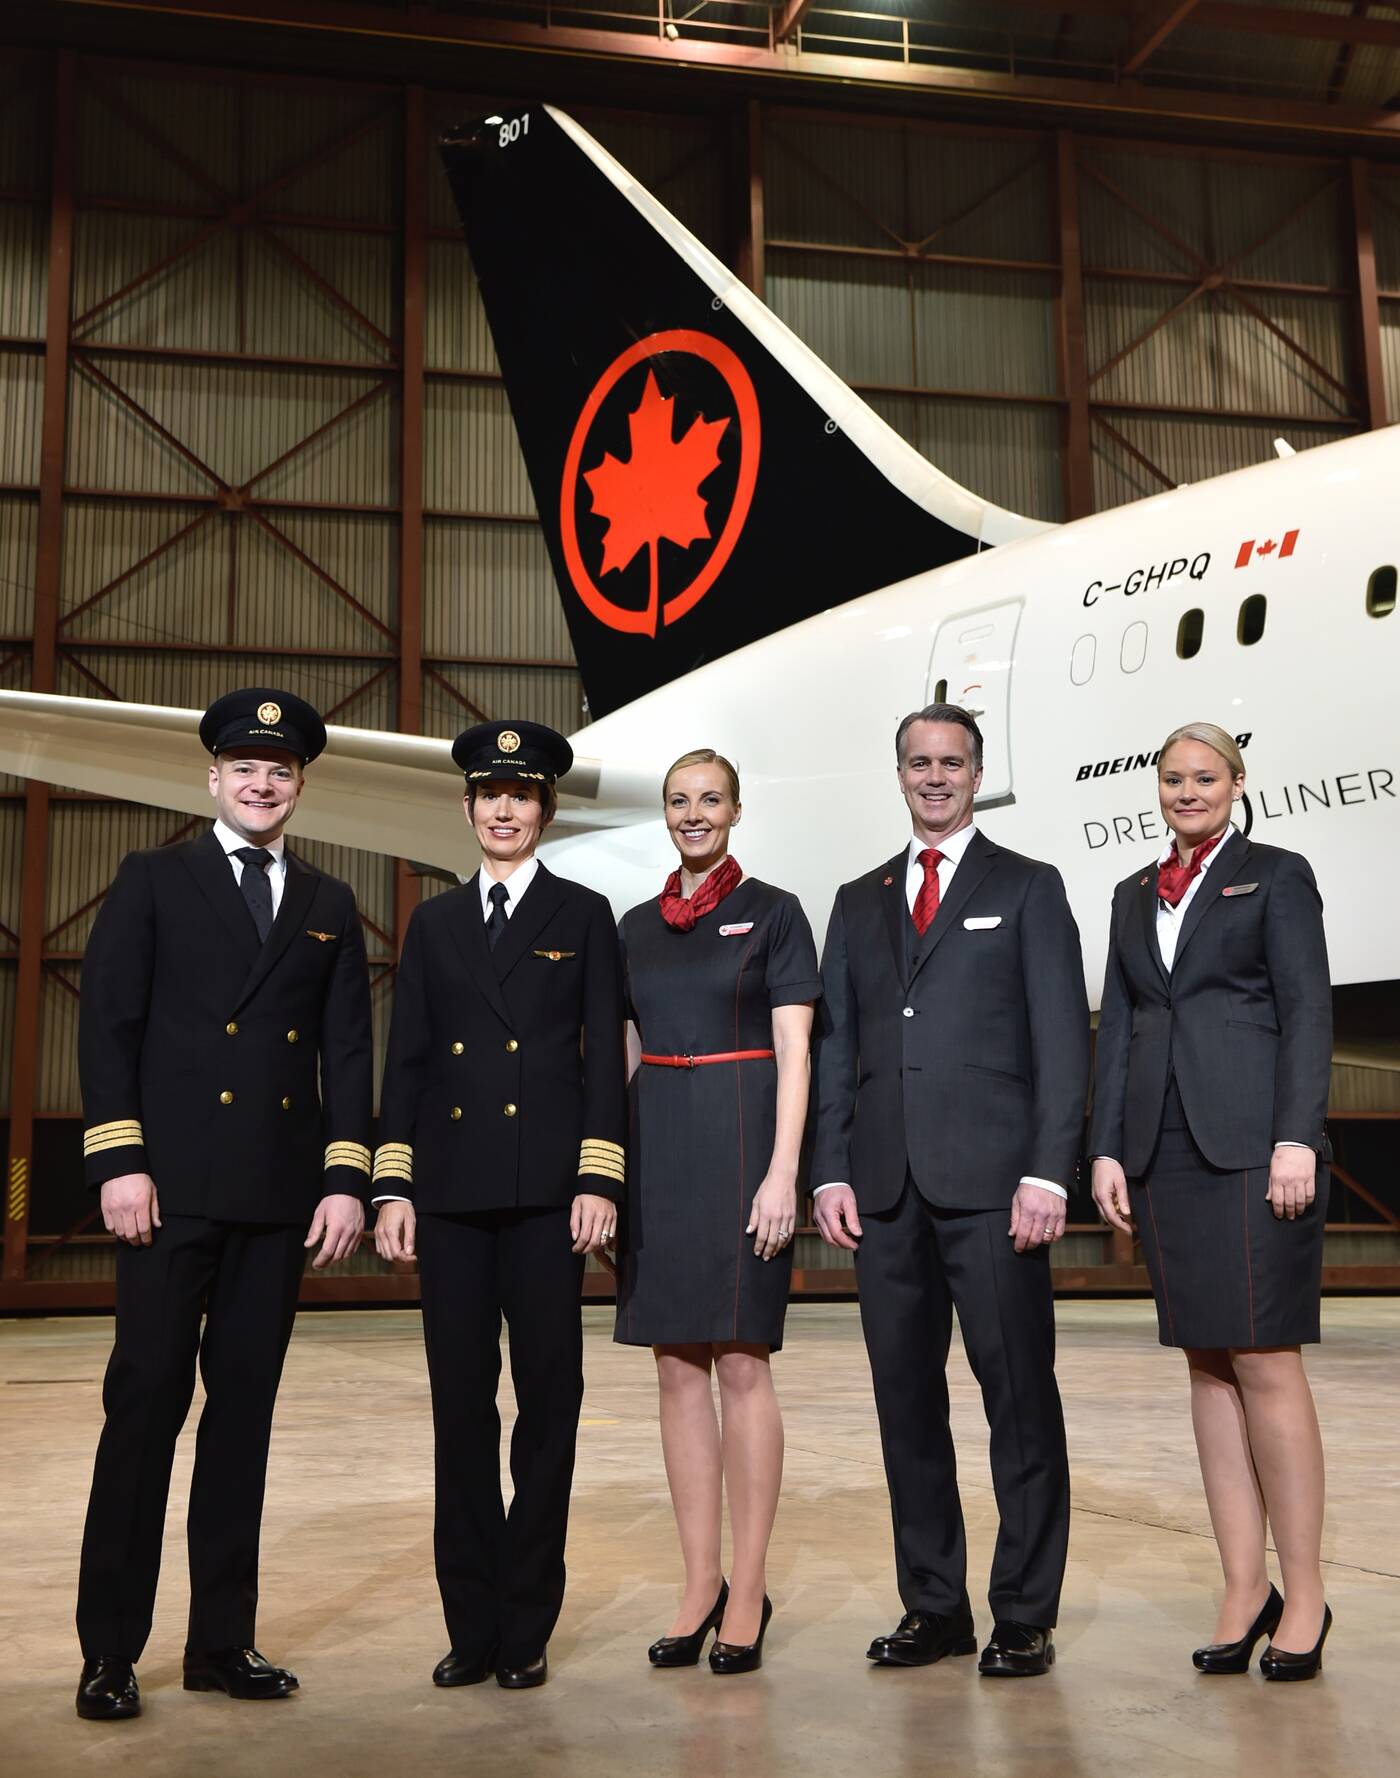 Air Canada just redesigned the look of its planes